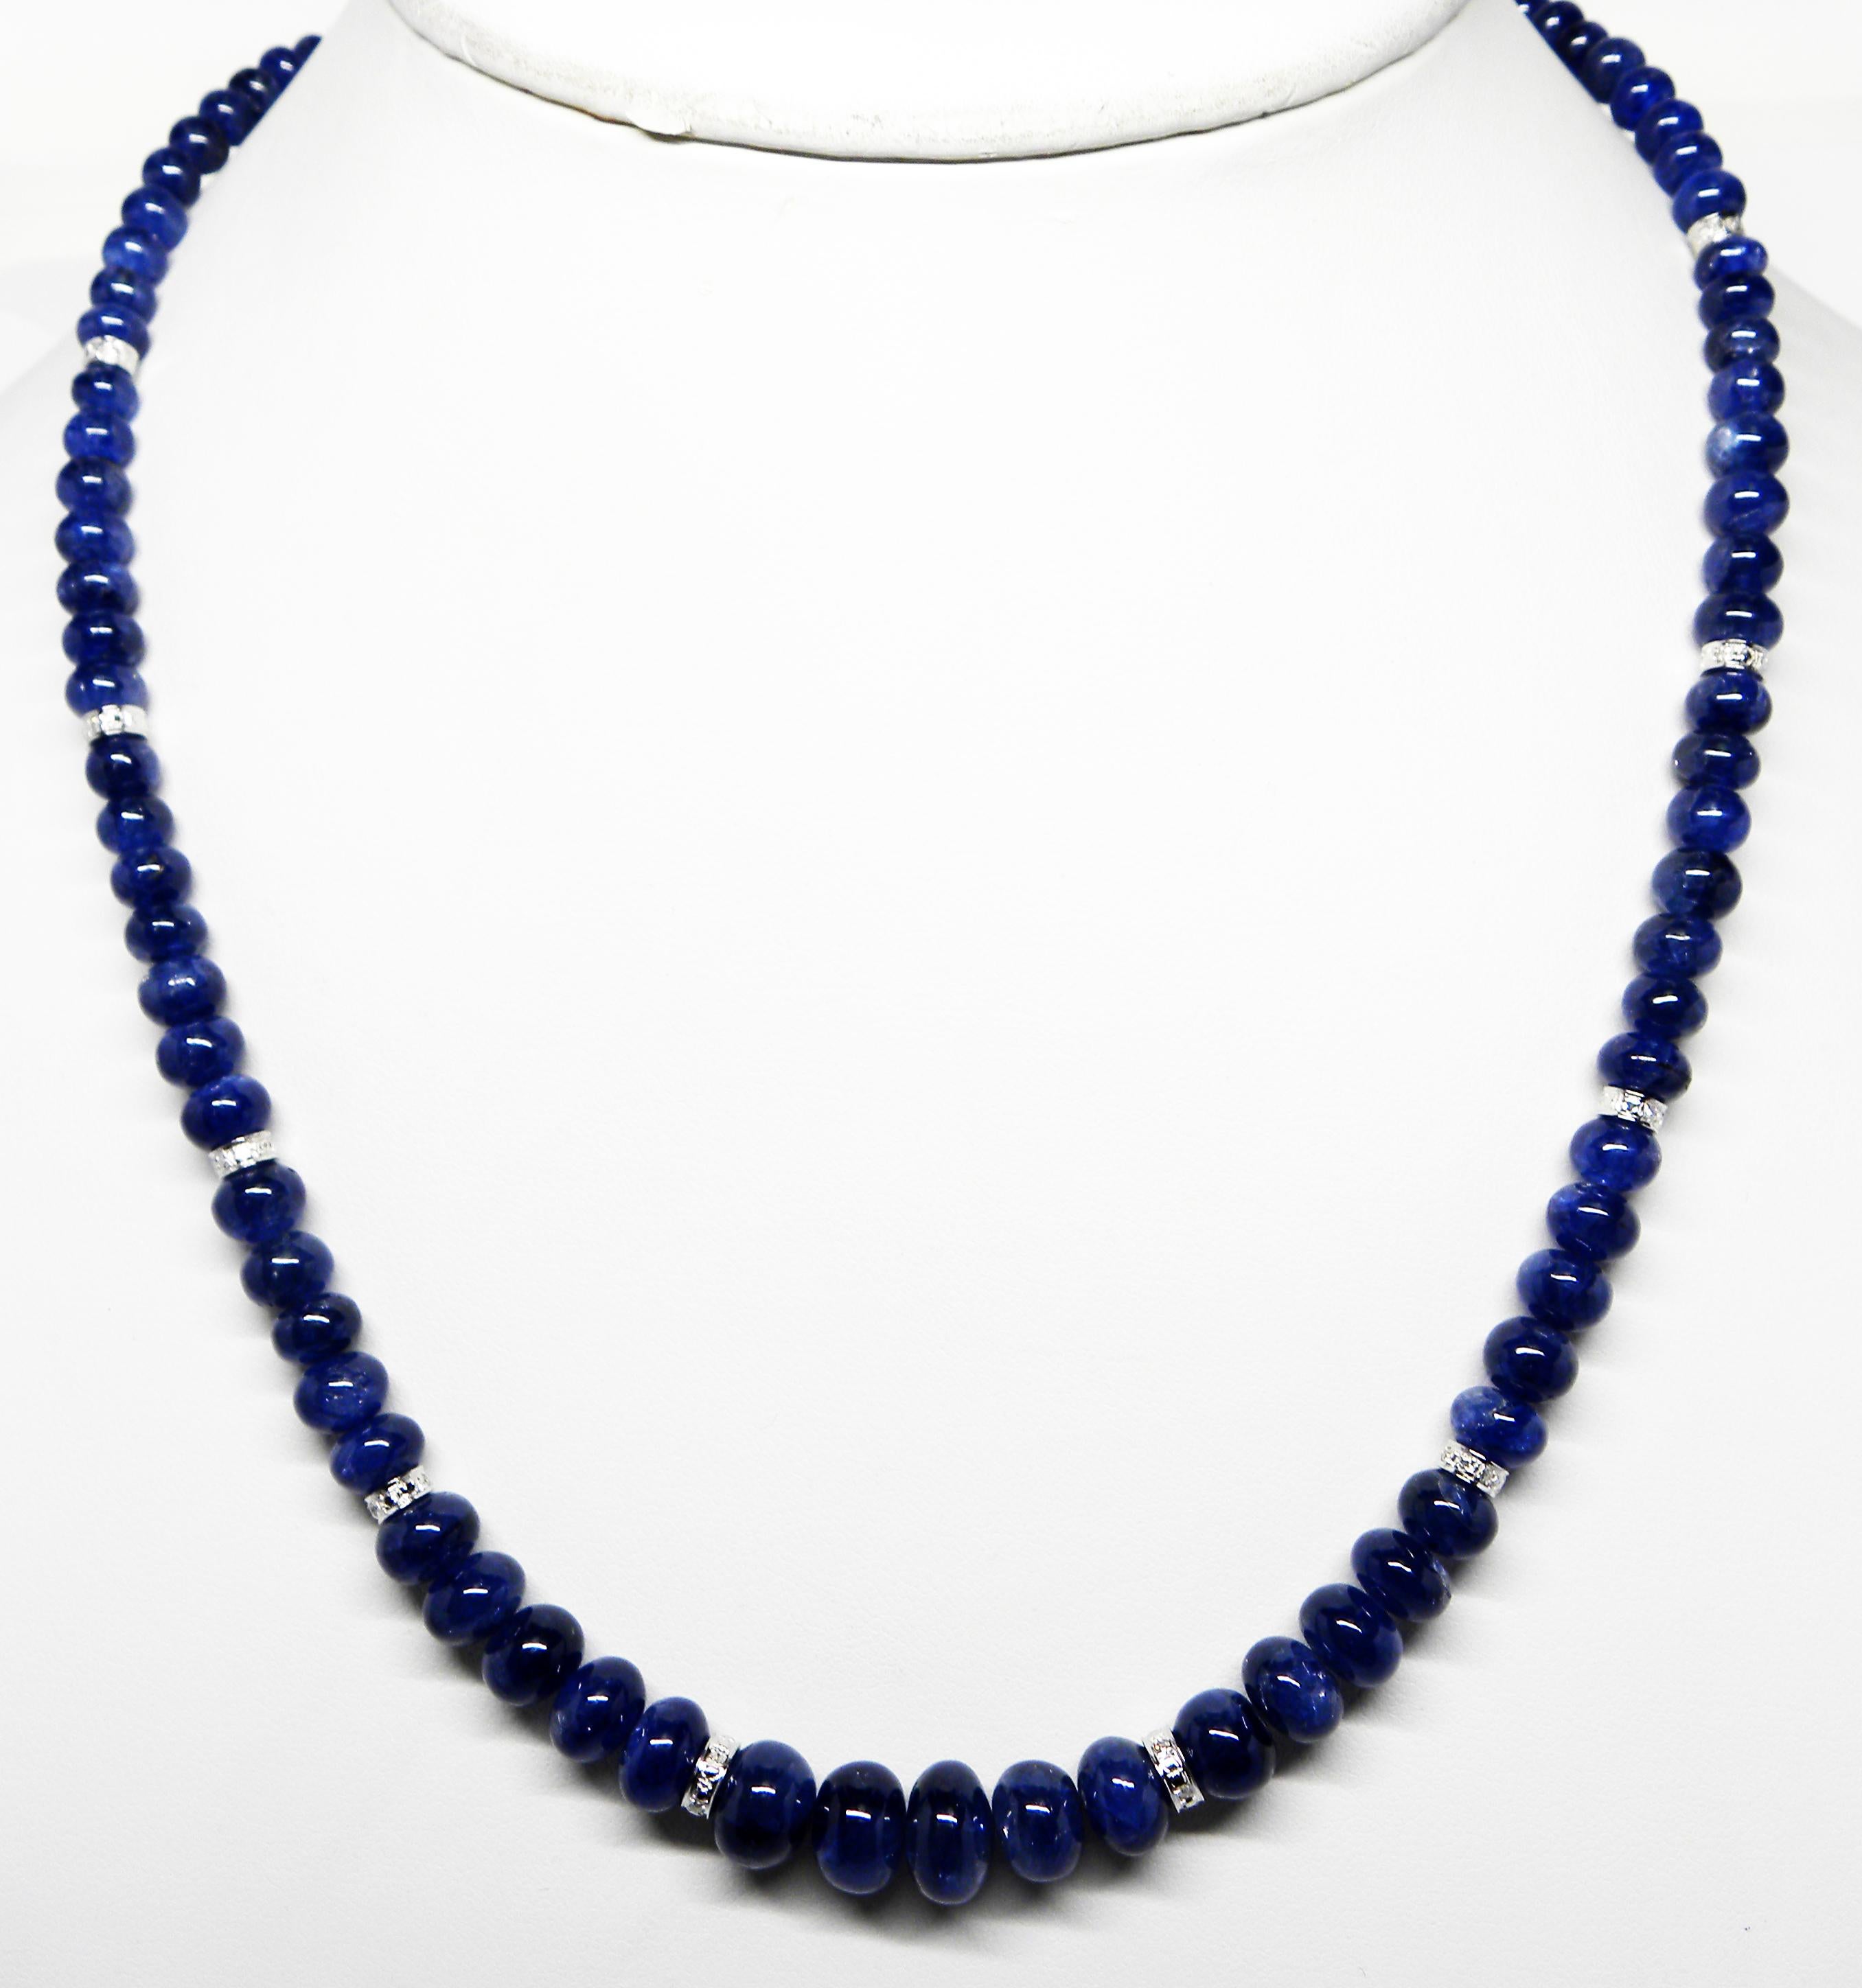 Blue Sapphire Beads Cts 188.06 and Diamond Roundel Necklace With 18k White Gold  For Sale 1